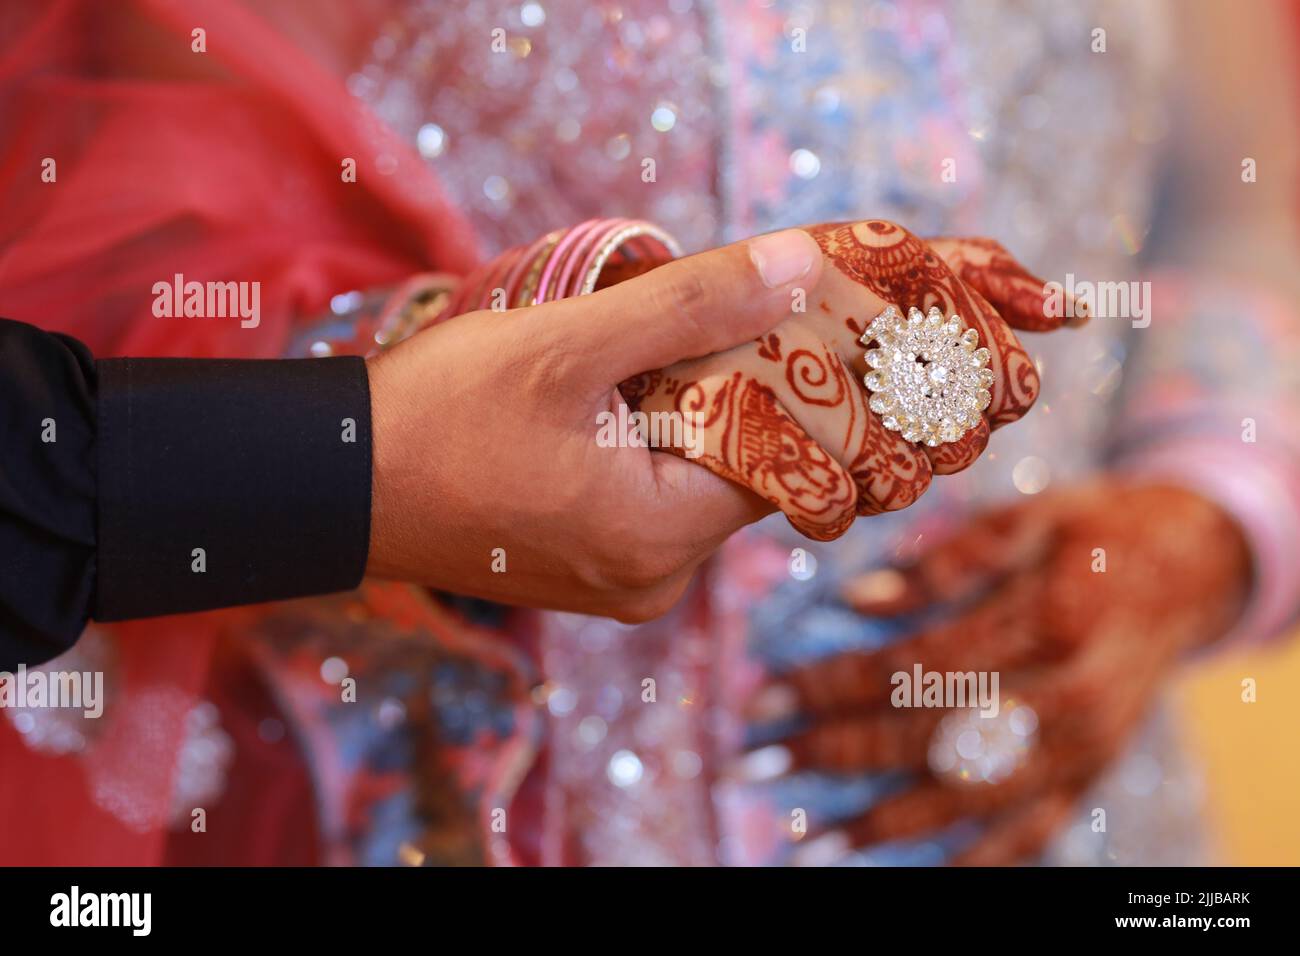 Pakistani bride and groom, close-up of hands Stock Photo